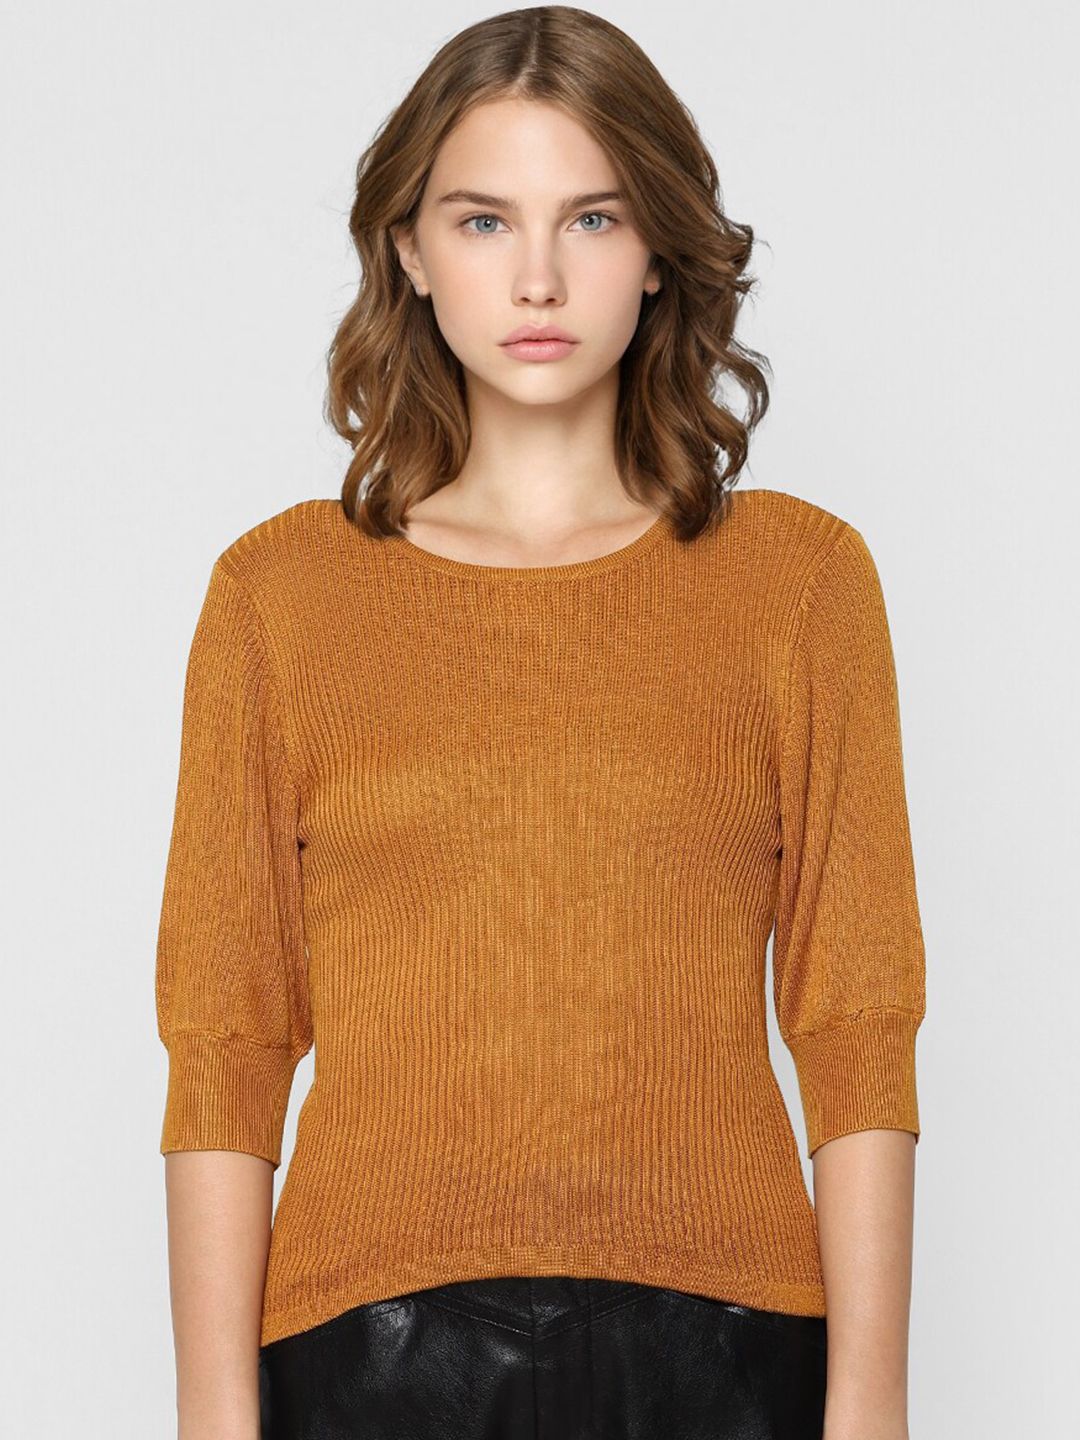 ONLY Women Mustard Solid Casual Sweater Price in India